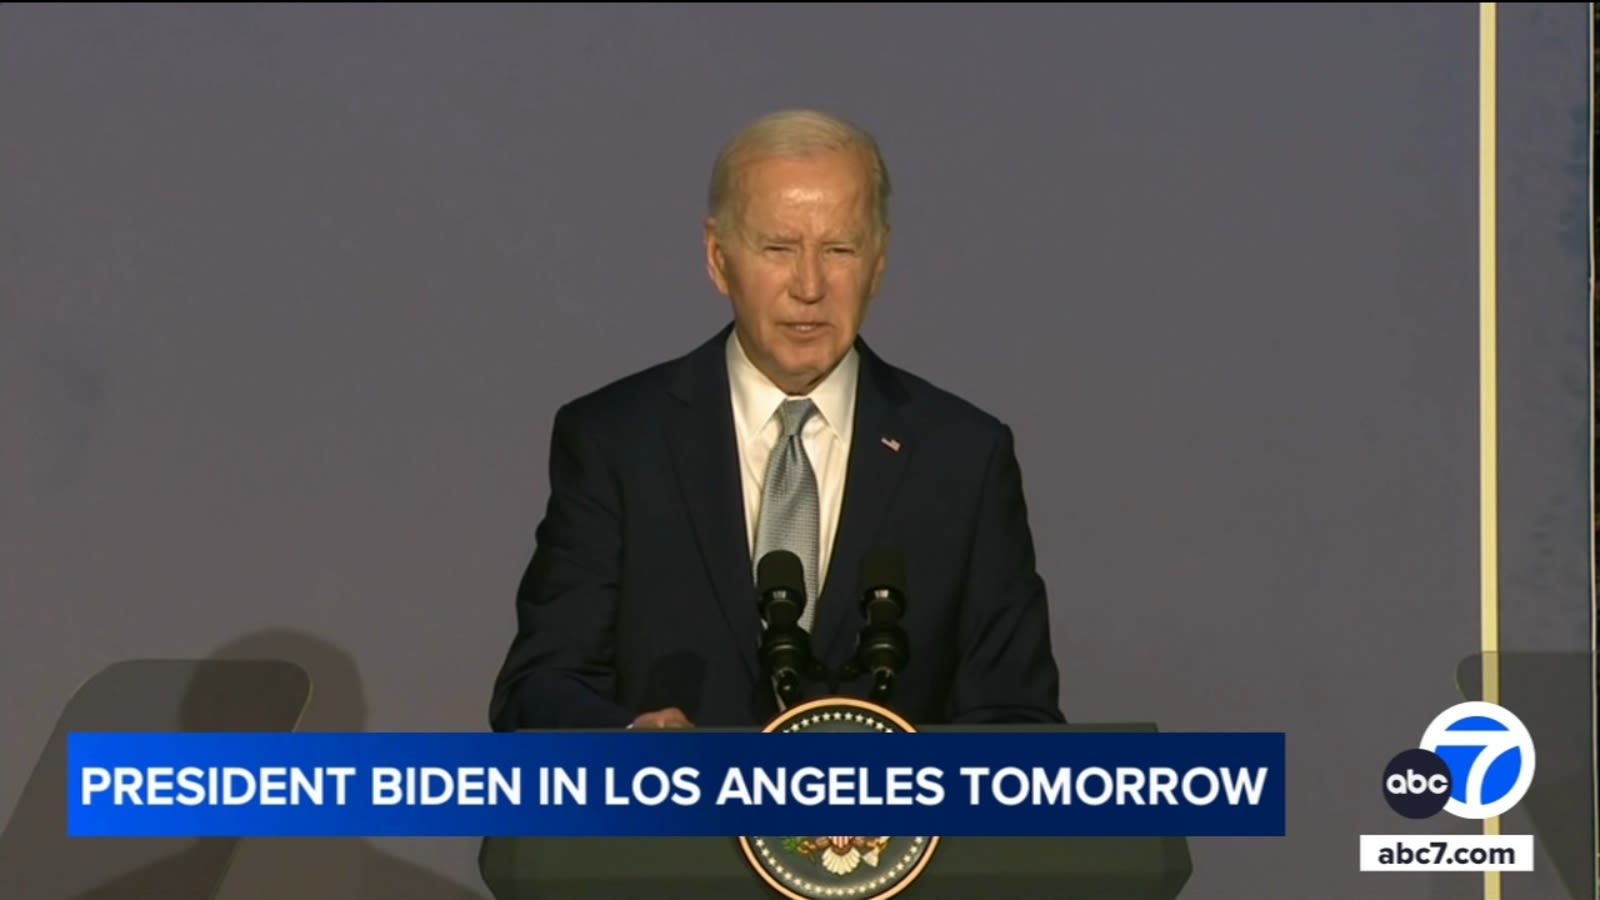 President Biden in Los Angeles this weekend for high-priced fundraiser